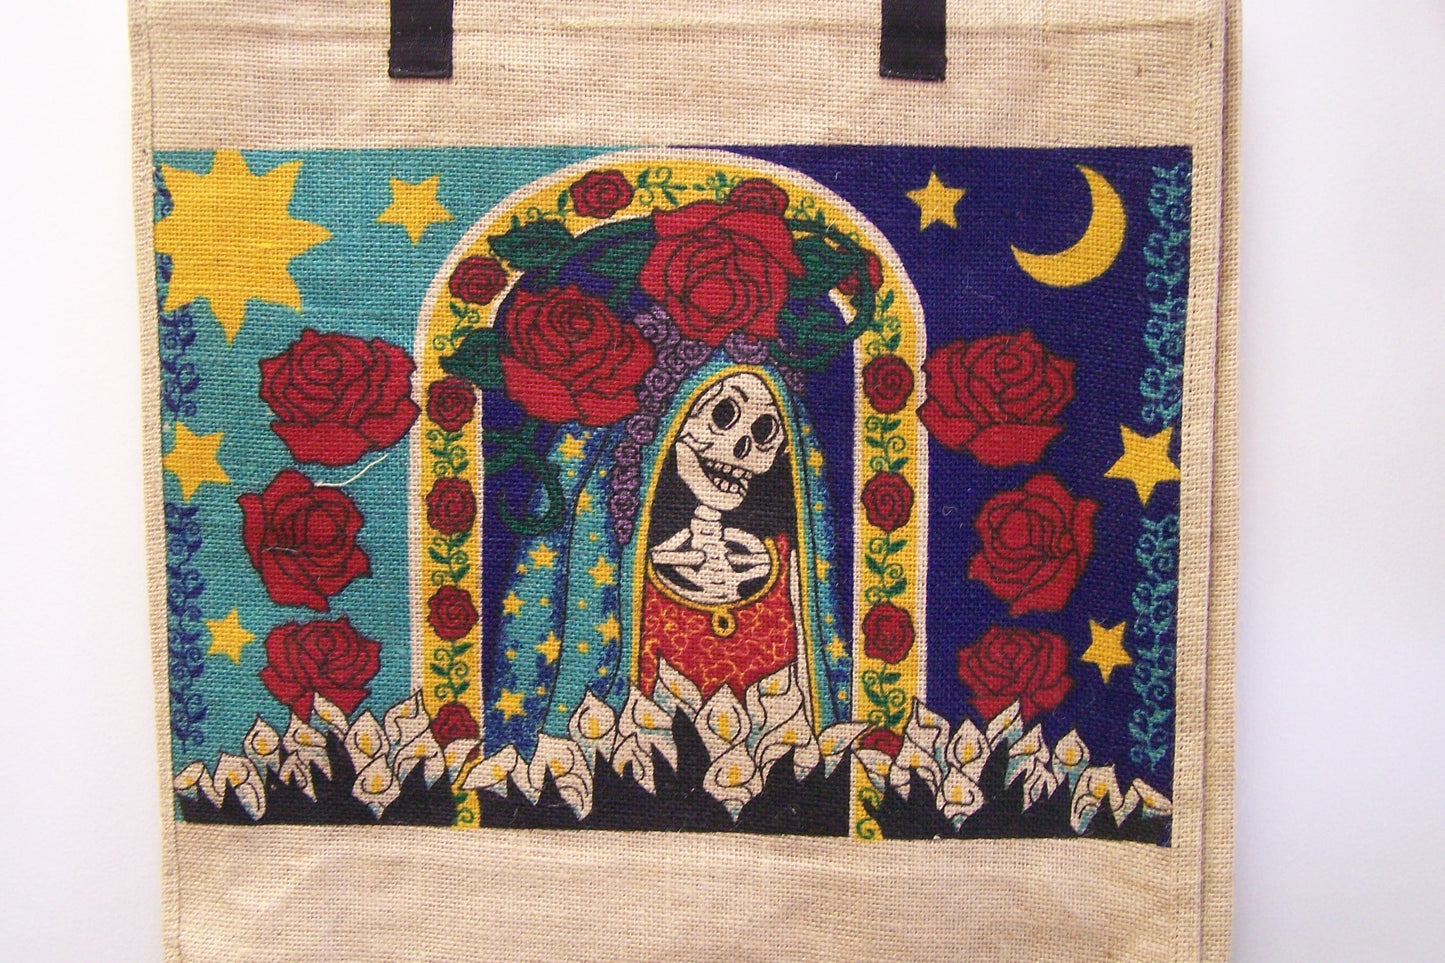 Day of the Dead Skeleton Virgin of Guadalupe Sturdy Jute Shopping Bag 18.5" x 18" x 5"